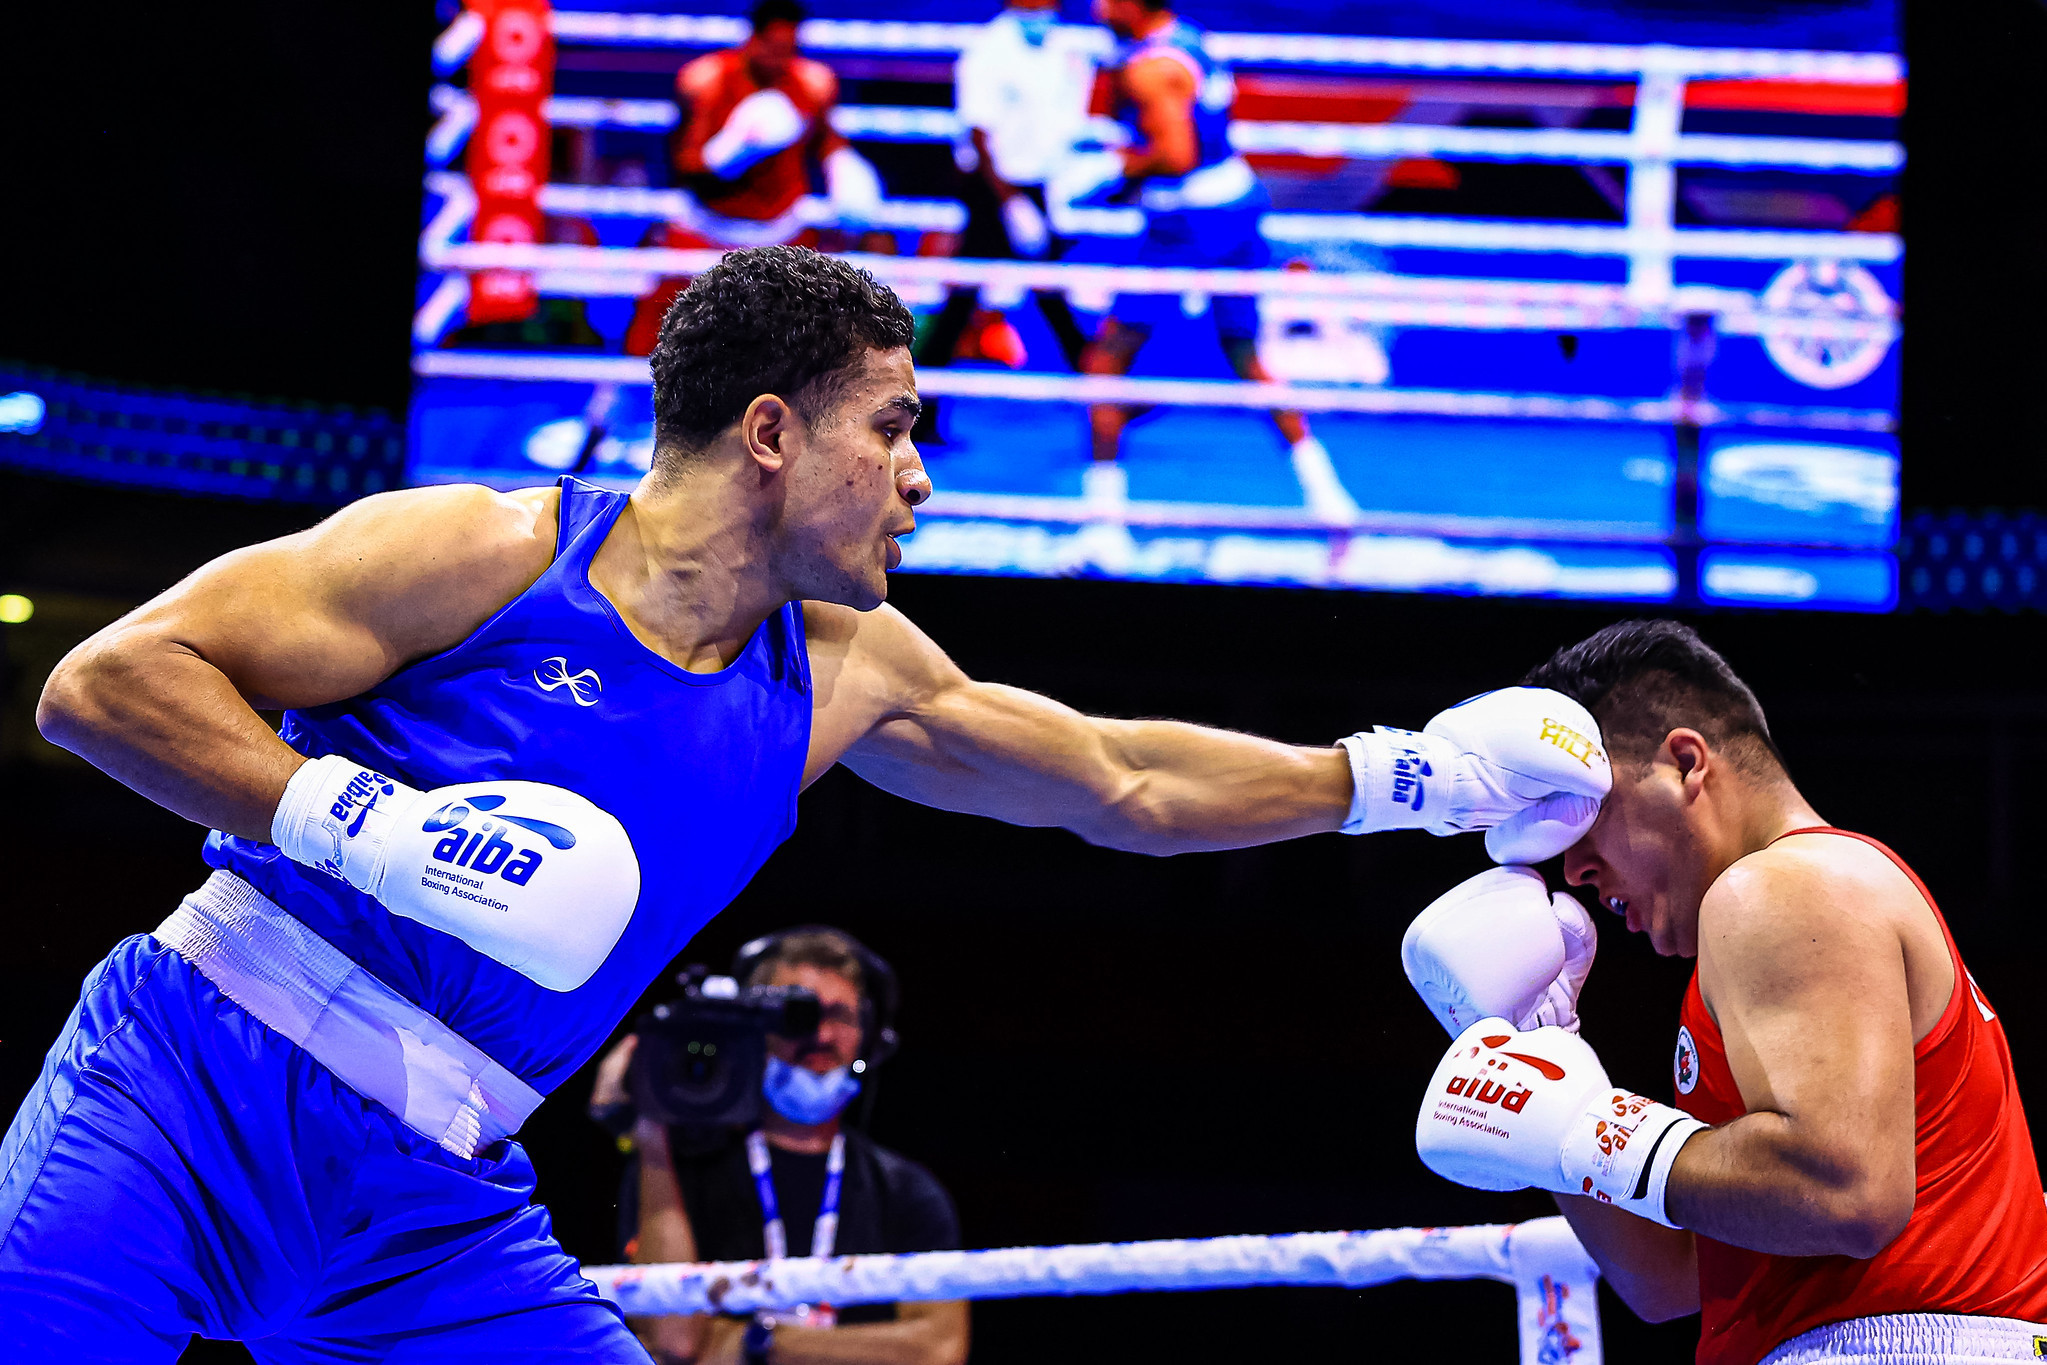 Delicious Orie was in impressive form for England in his fight against Mexico's Luis Gomez Meneses ©AIBA